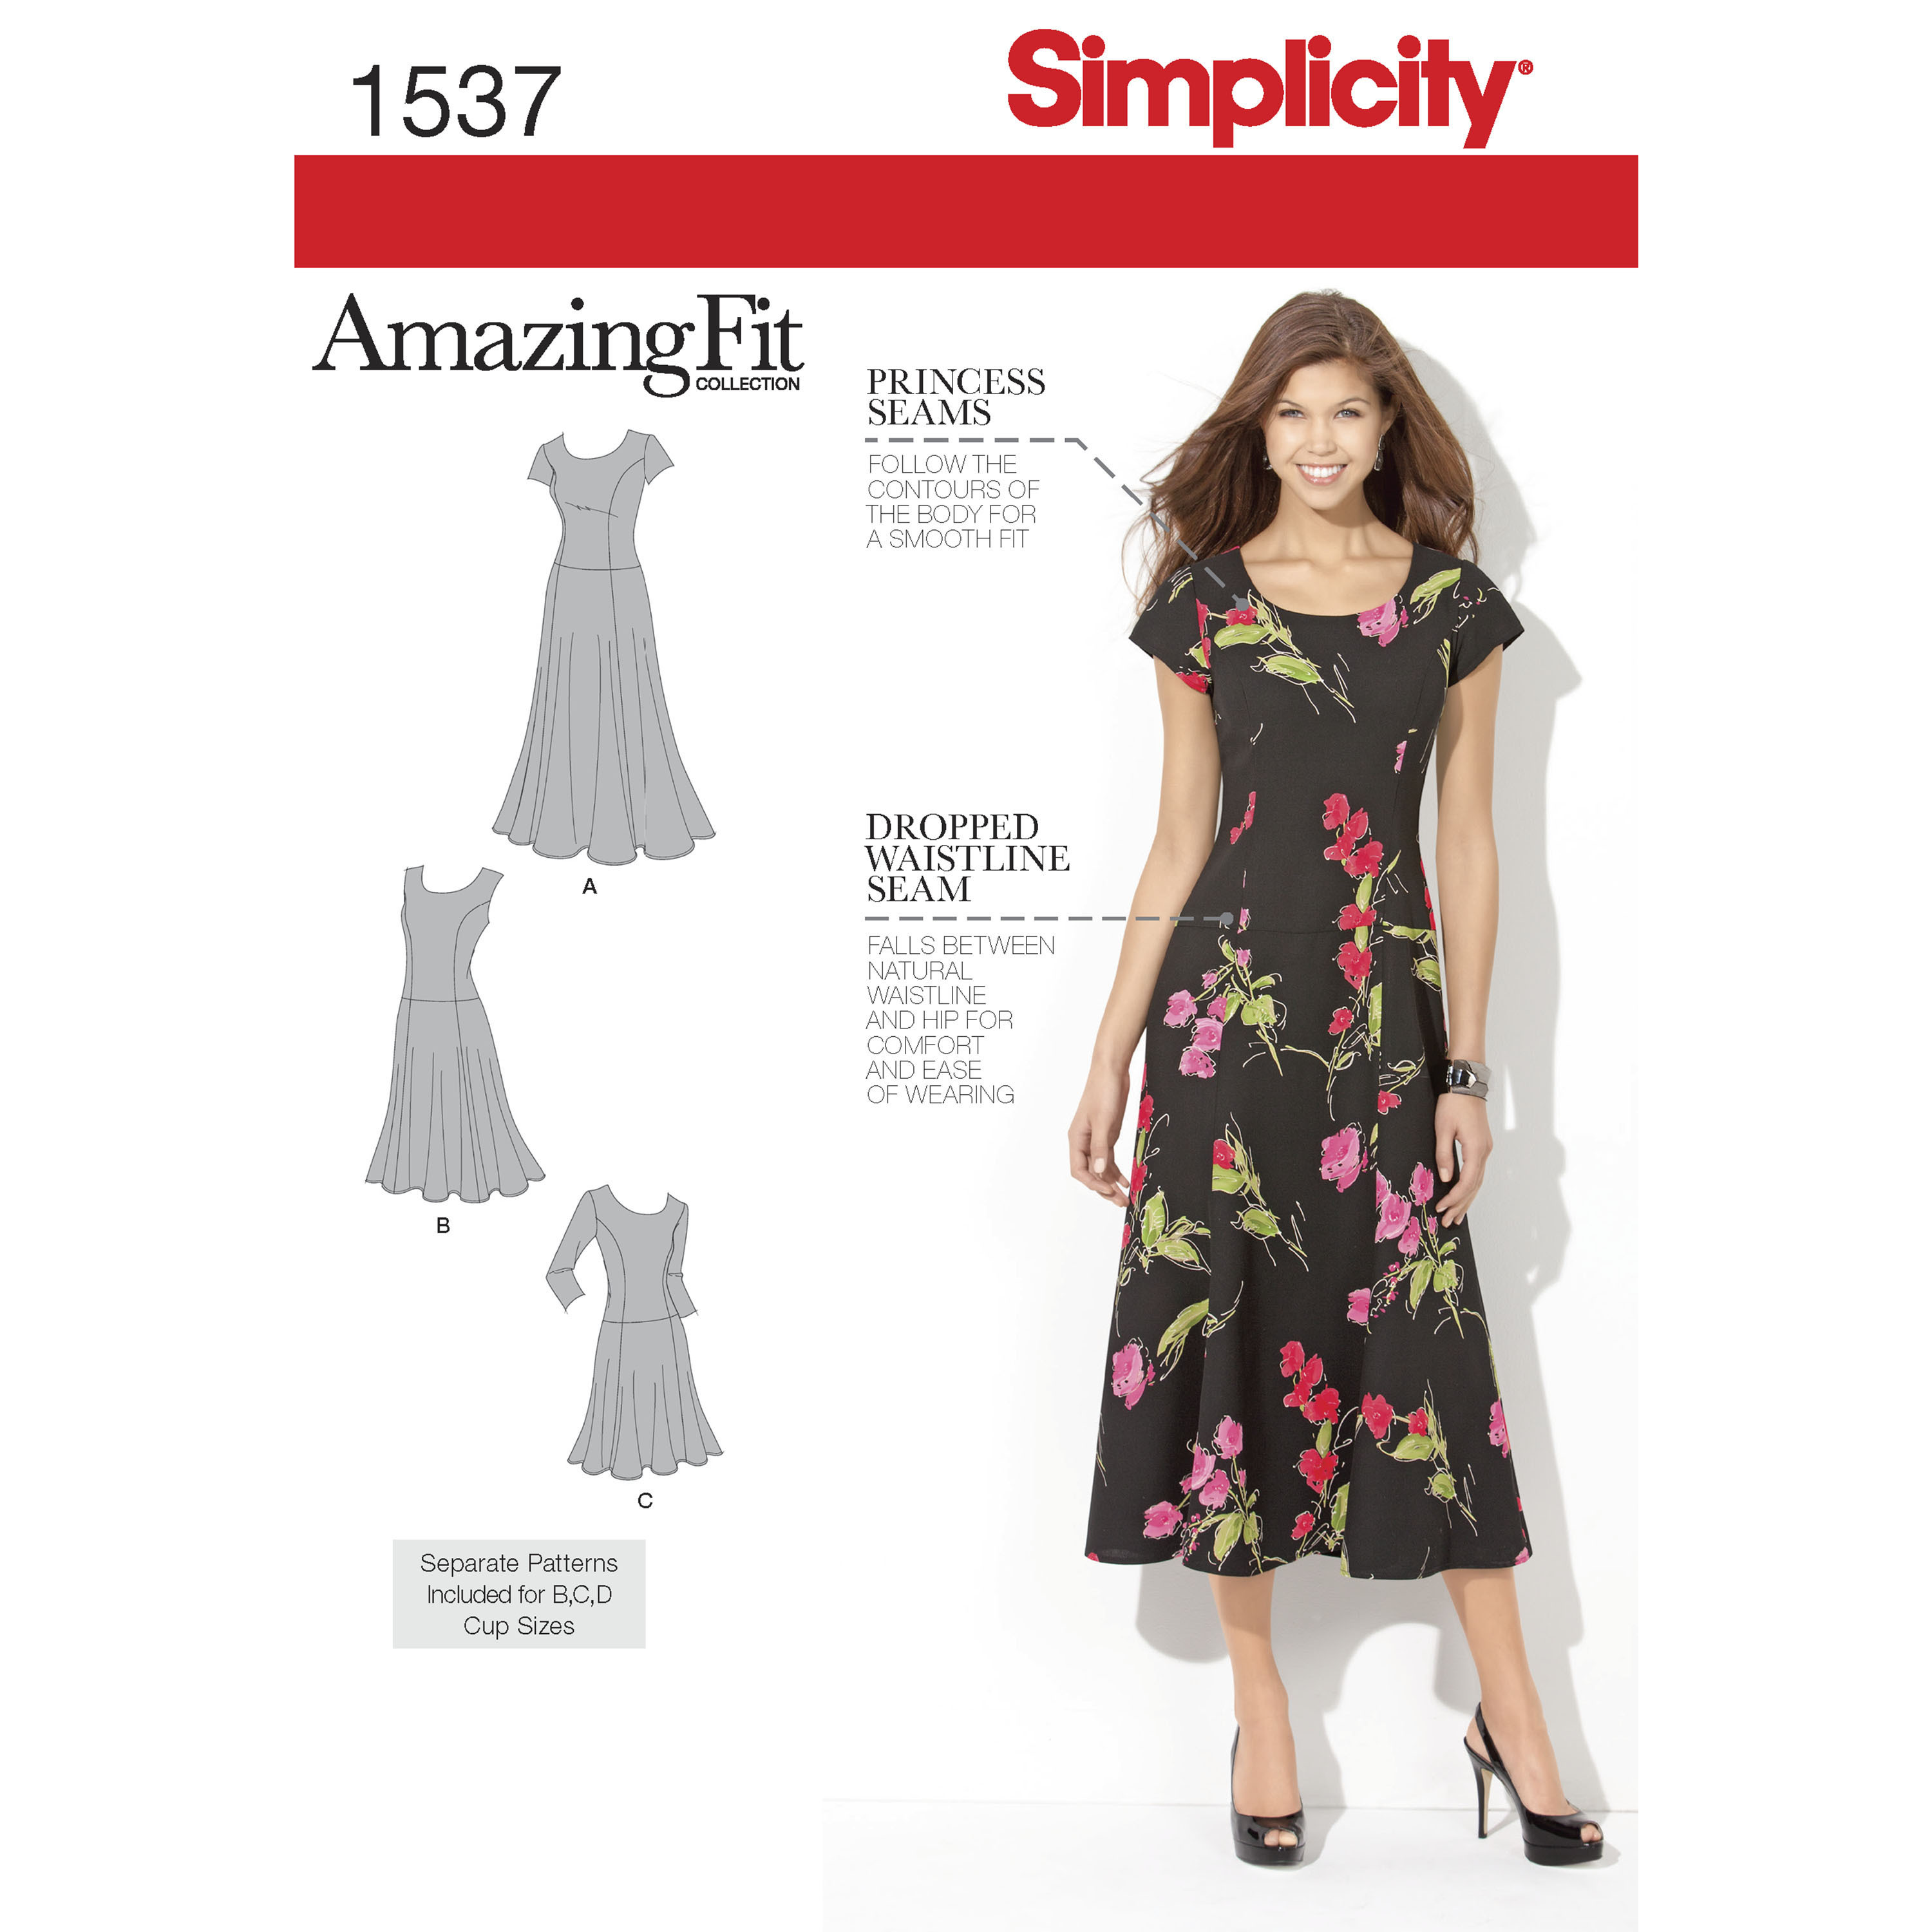 Women's and Plus Size Amazing Fit Dress Simplicity Sewing Pattern